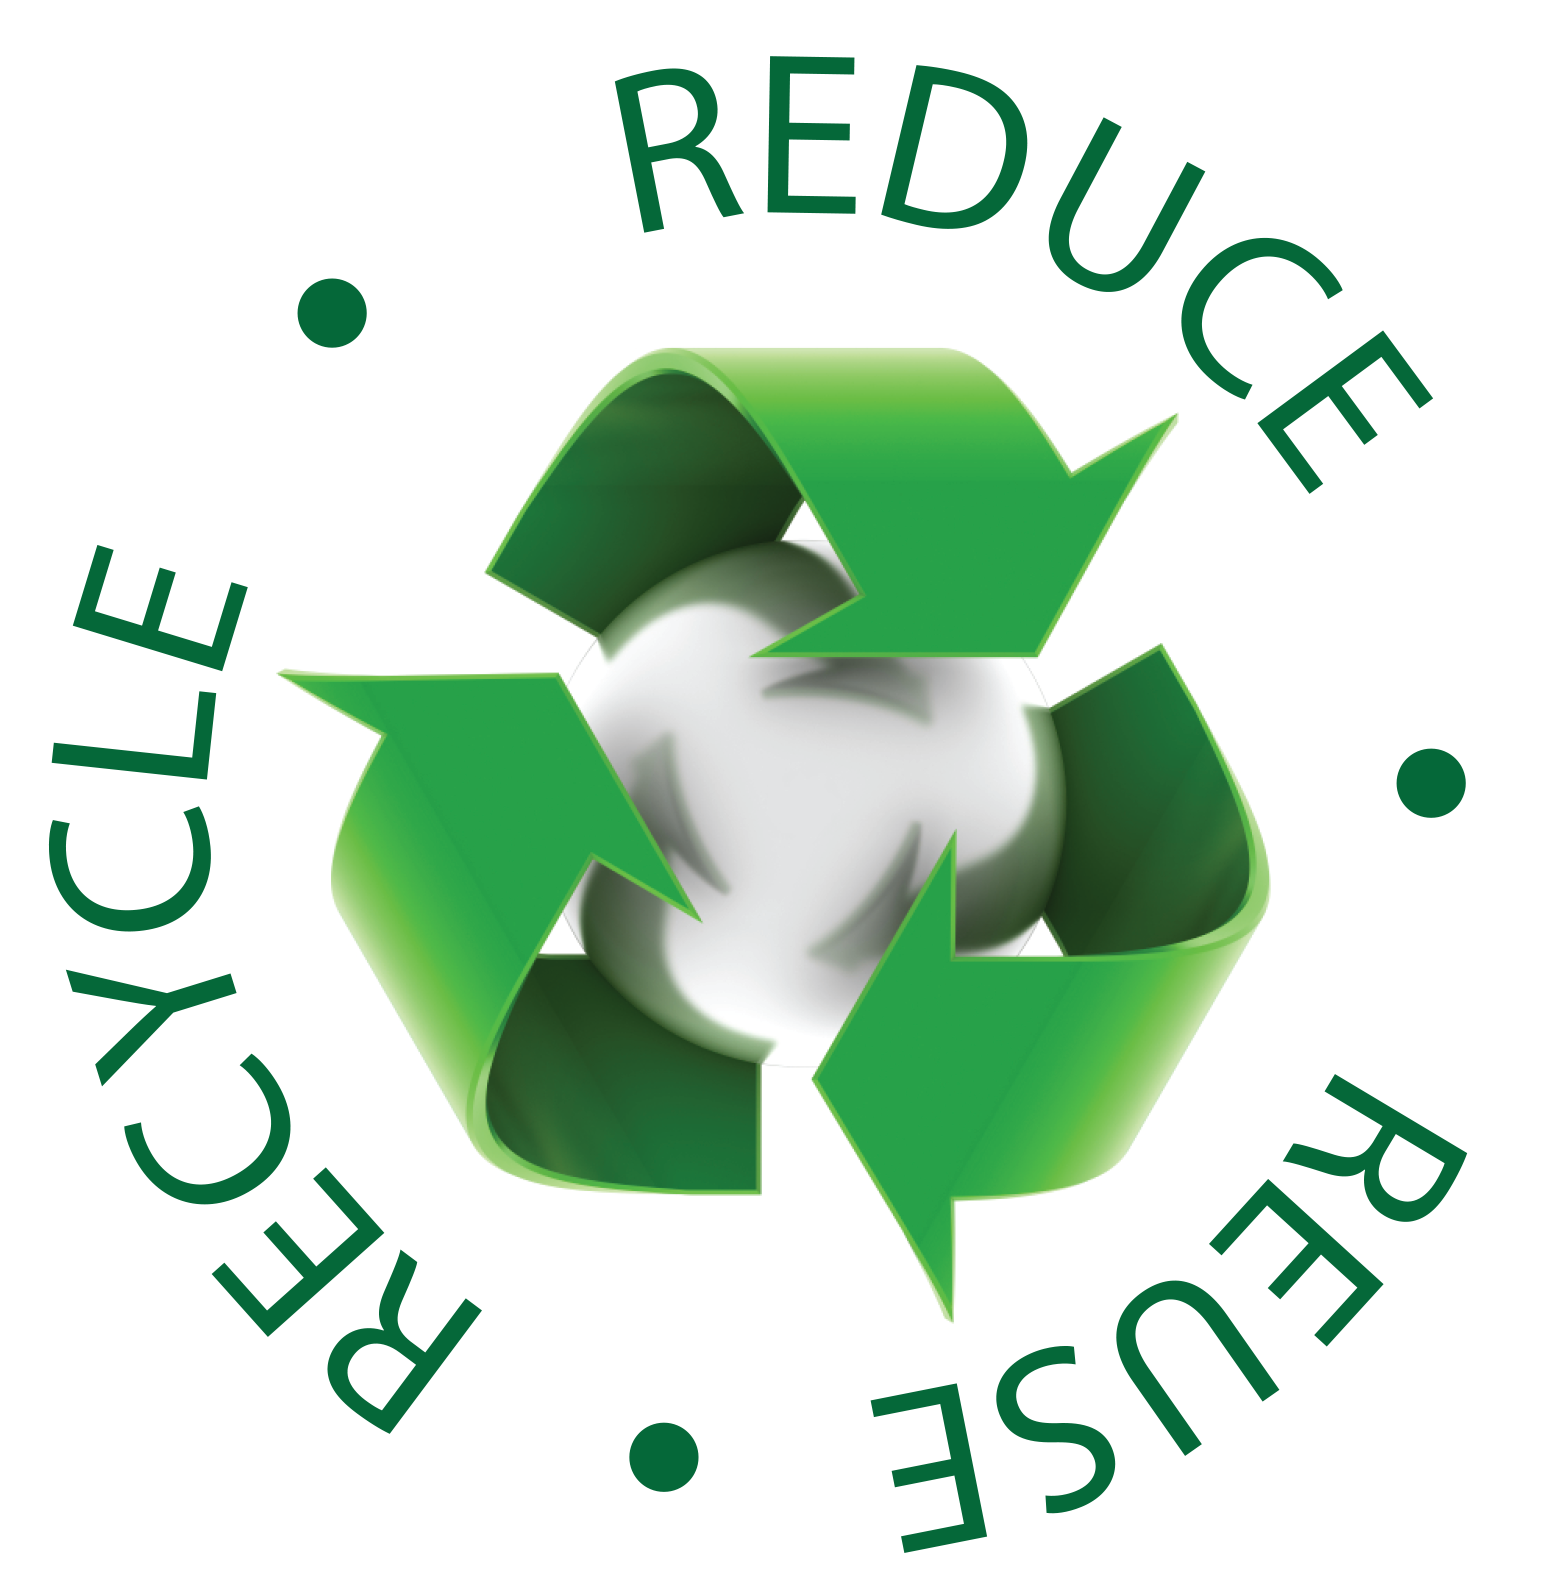 Free Reduce Reuse Recycle Symbol, Download Free Reduce Reuse Recycle